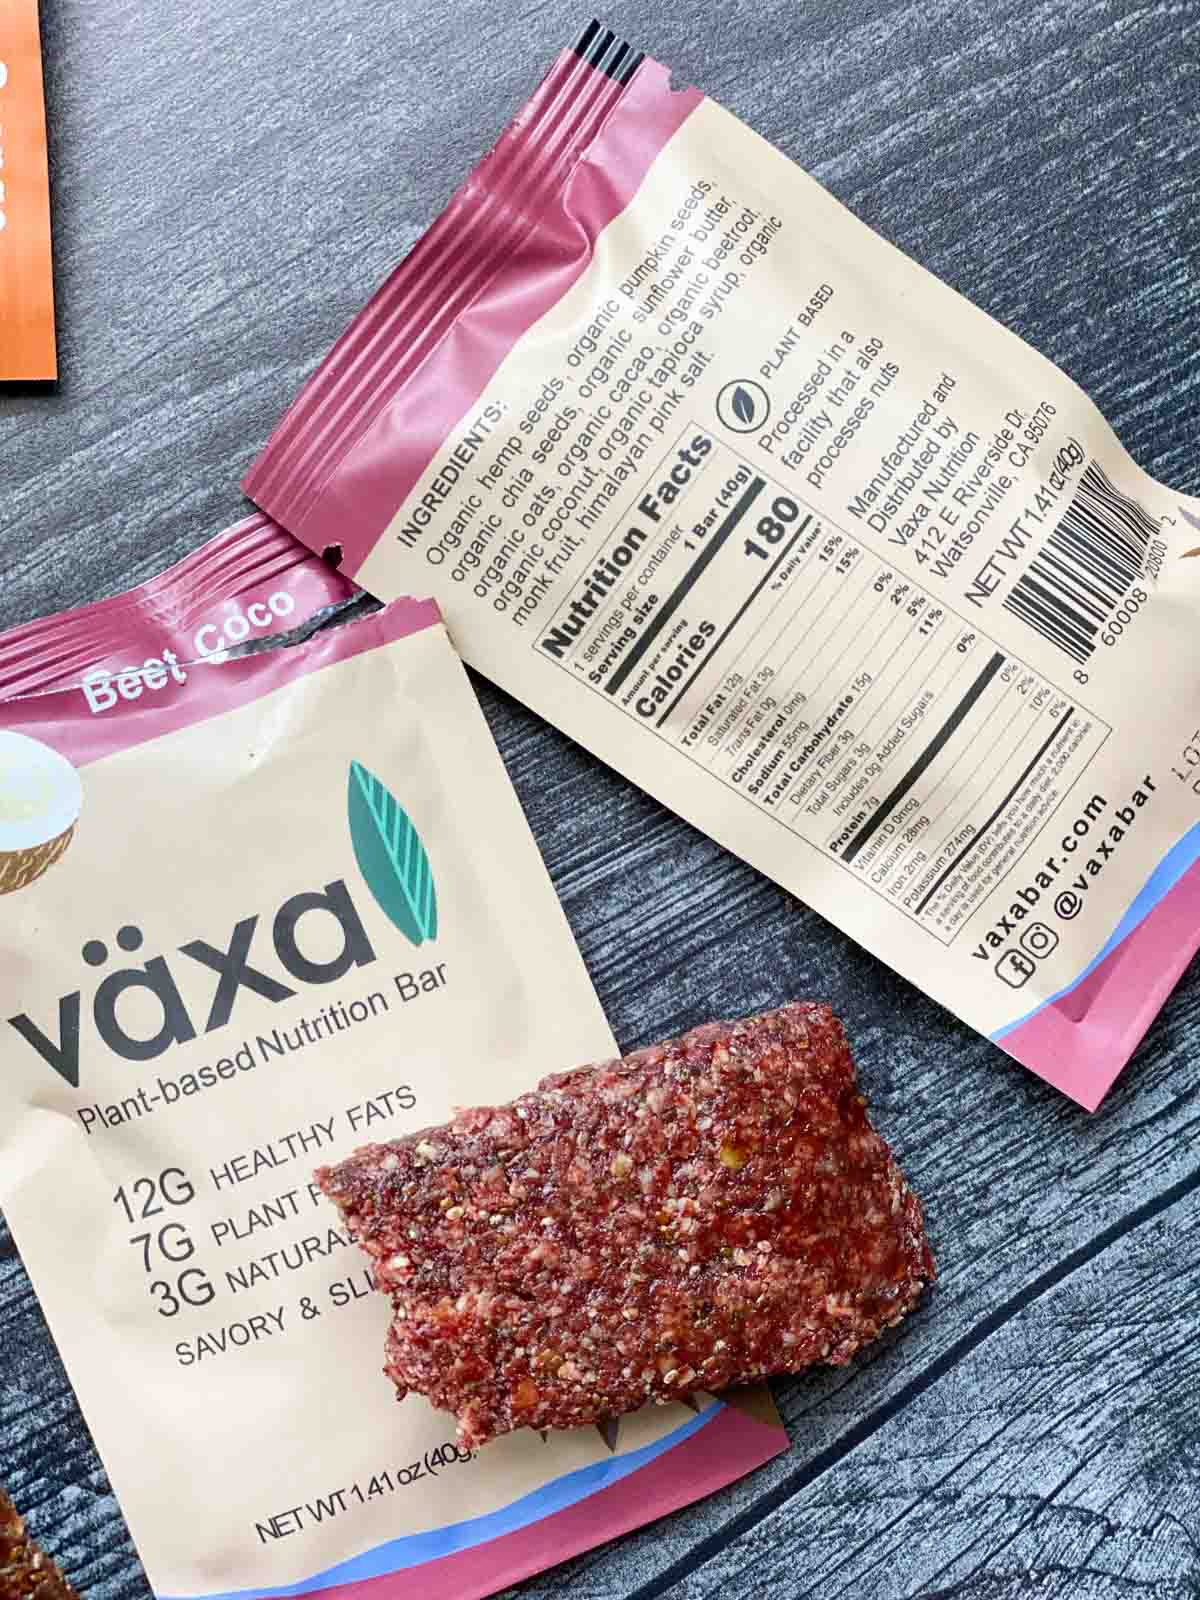 beet coco växa bar unwrapped next to nutrition facts